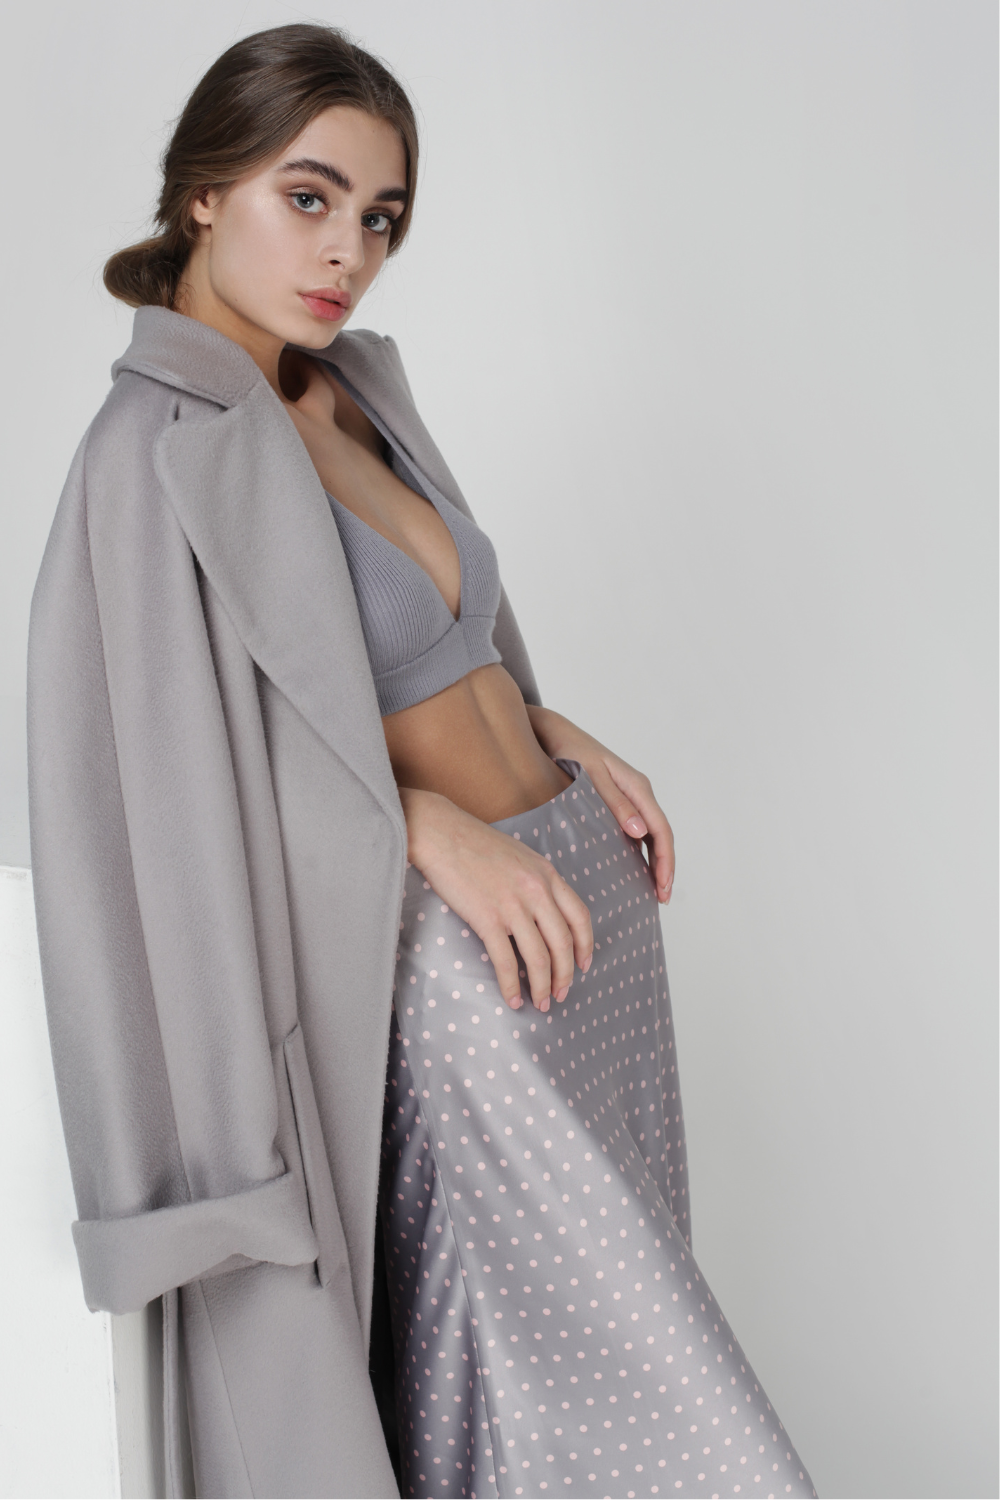 Silk skirt with polka dots on rubber band (Miss Secret) SK-005-grey